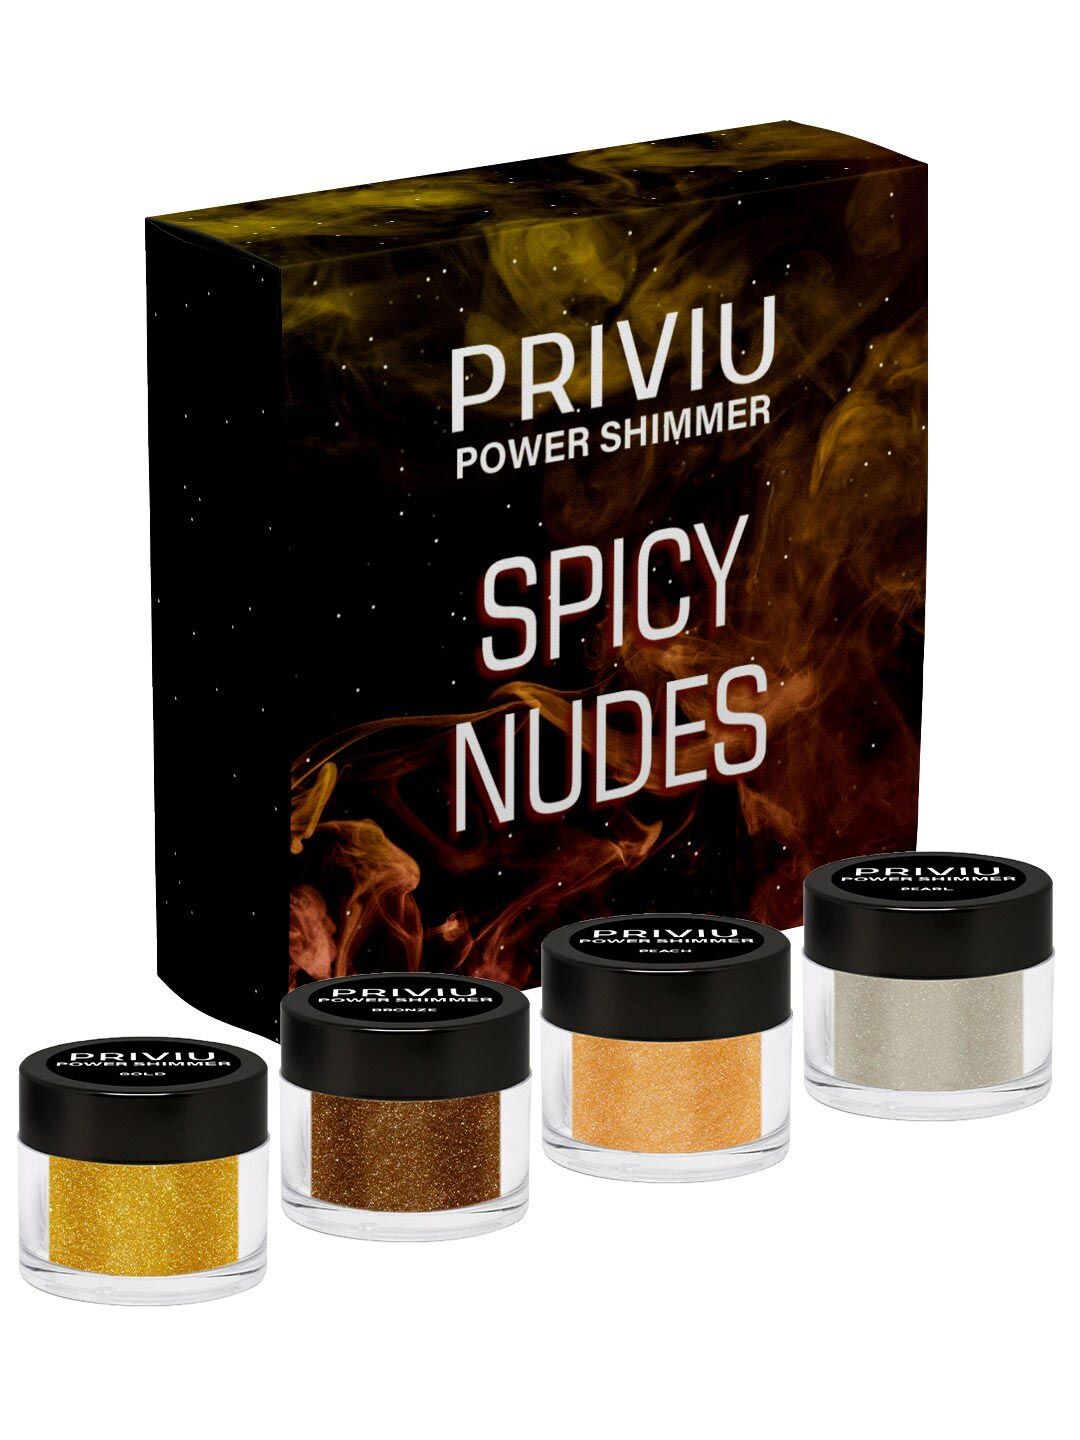 PRIVIU Power Shimmer - Spicy Nudes Price in India